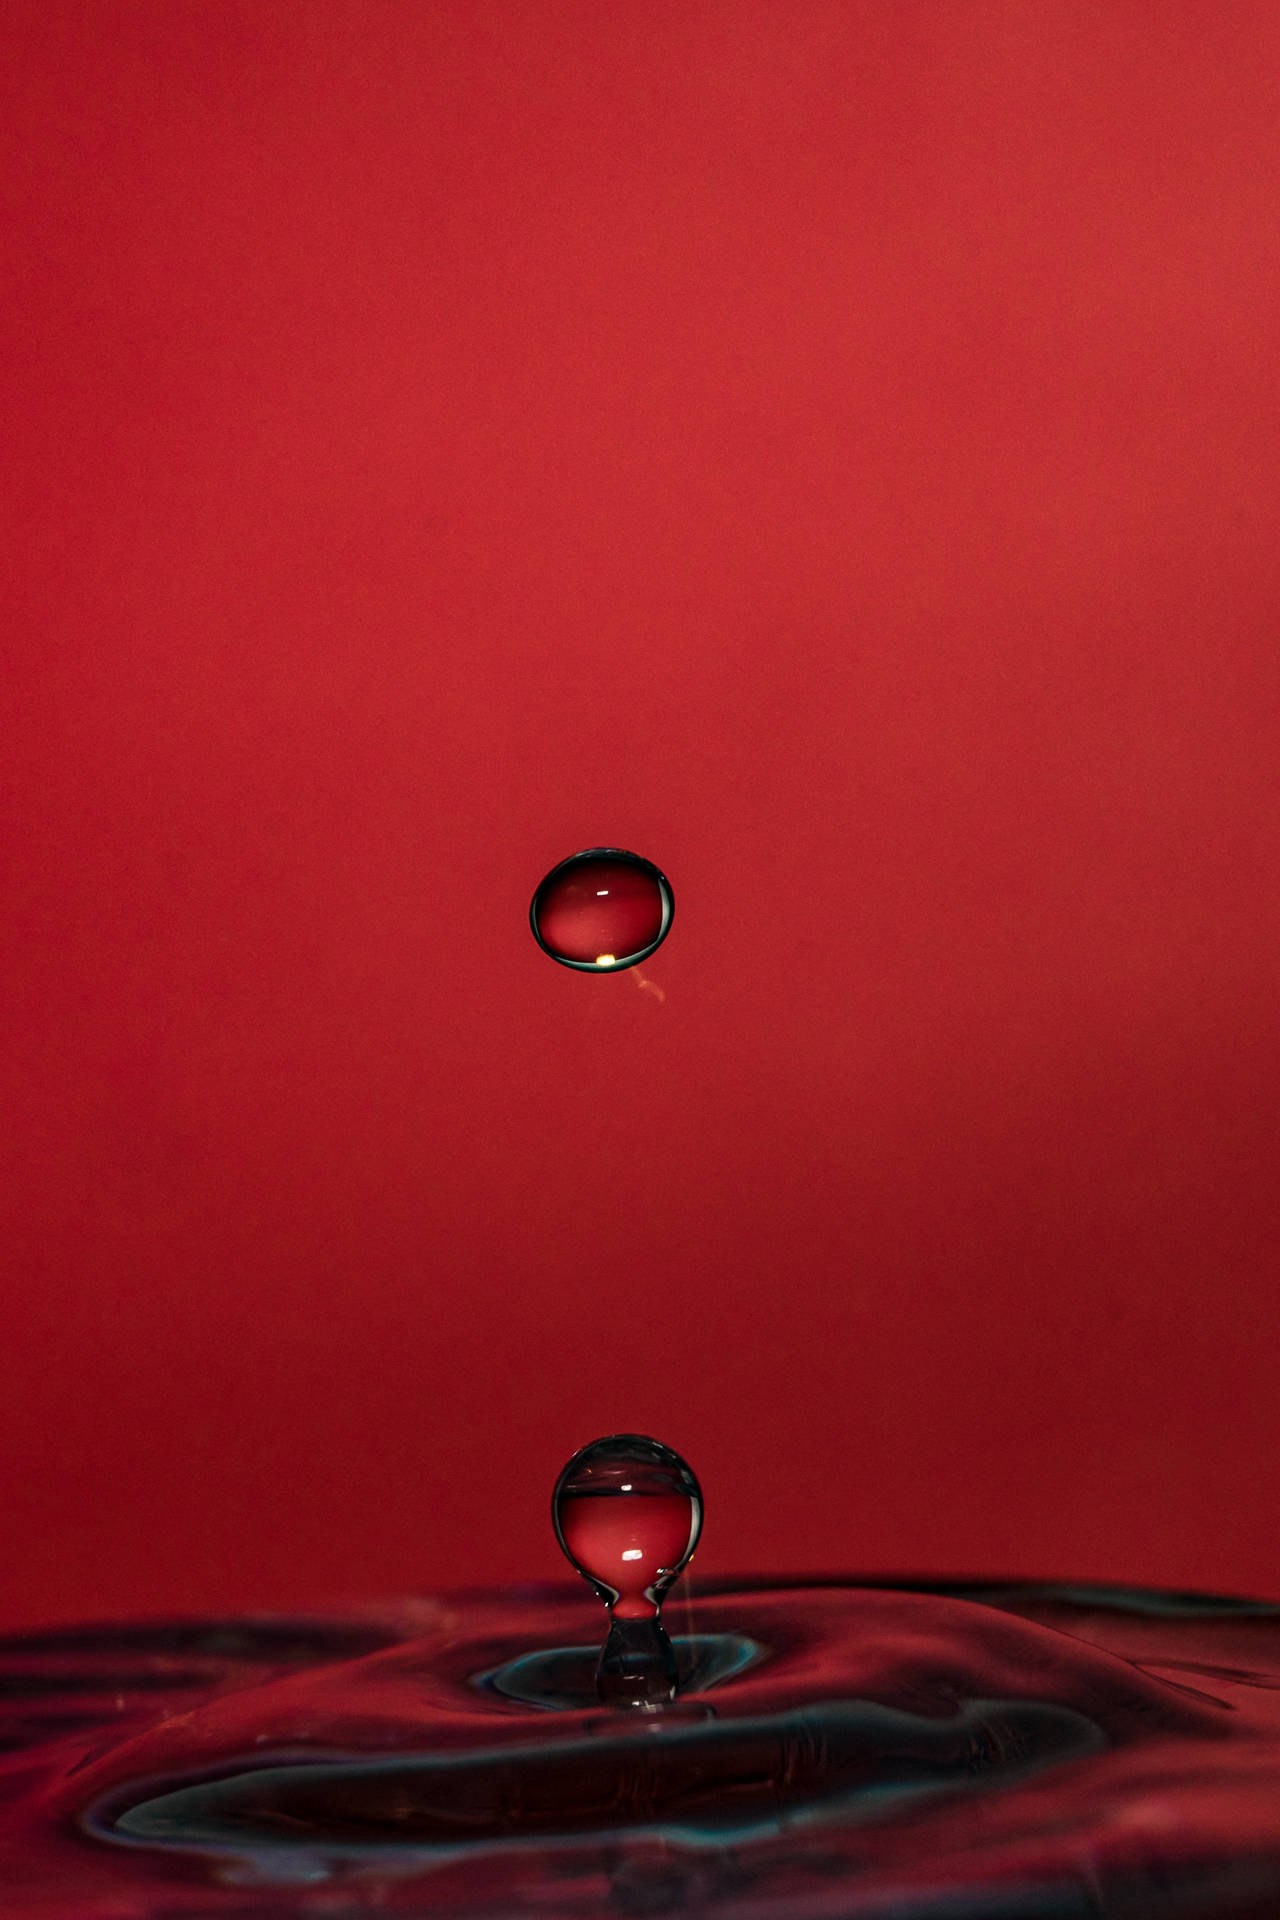 Coolest Iphone Red Water Droplets Background